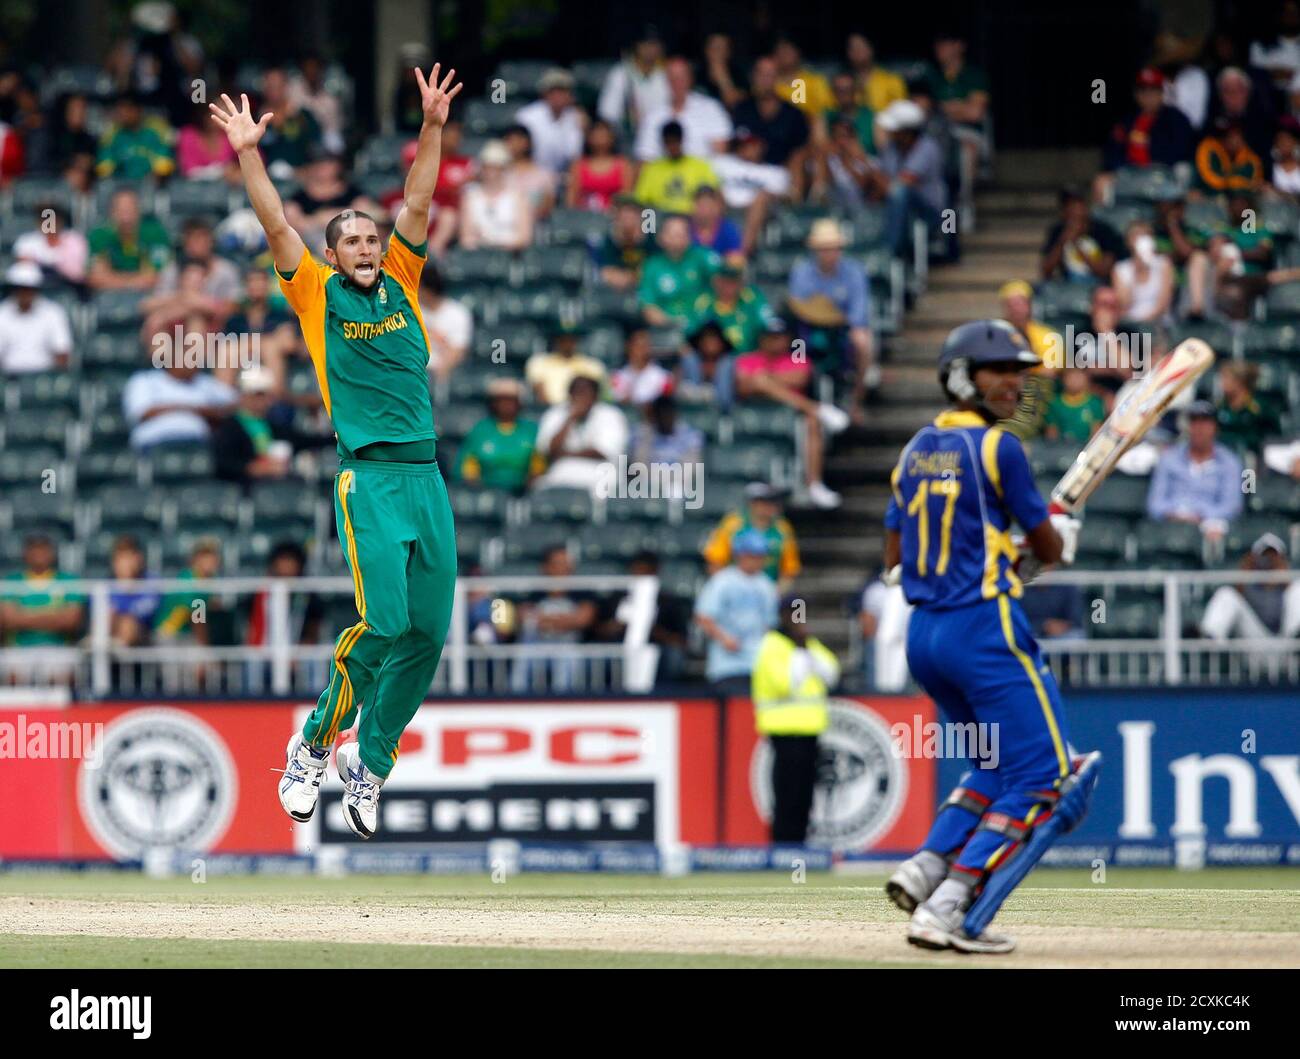 South Africa's Wayne Parnell celebrates the dismissal of Sri Lanka's Dinesh Chandimal (R) who was caught out by AB de Villiers during their fifth one-day international cricket match in Johannesburg January 22, 2012. REUTERS/Siphiwe Sibeko (SOUTH AFRICA - Tags: SPORT CRICKET) Stock Photo